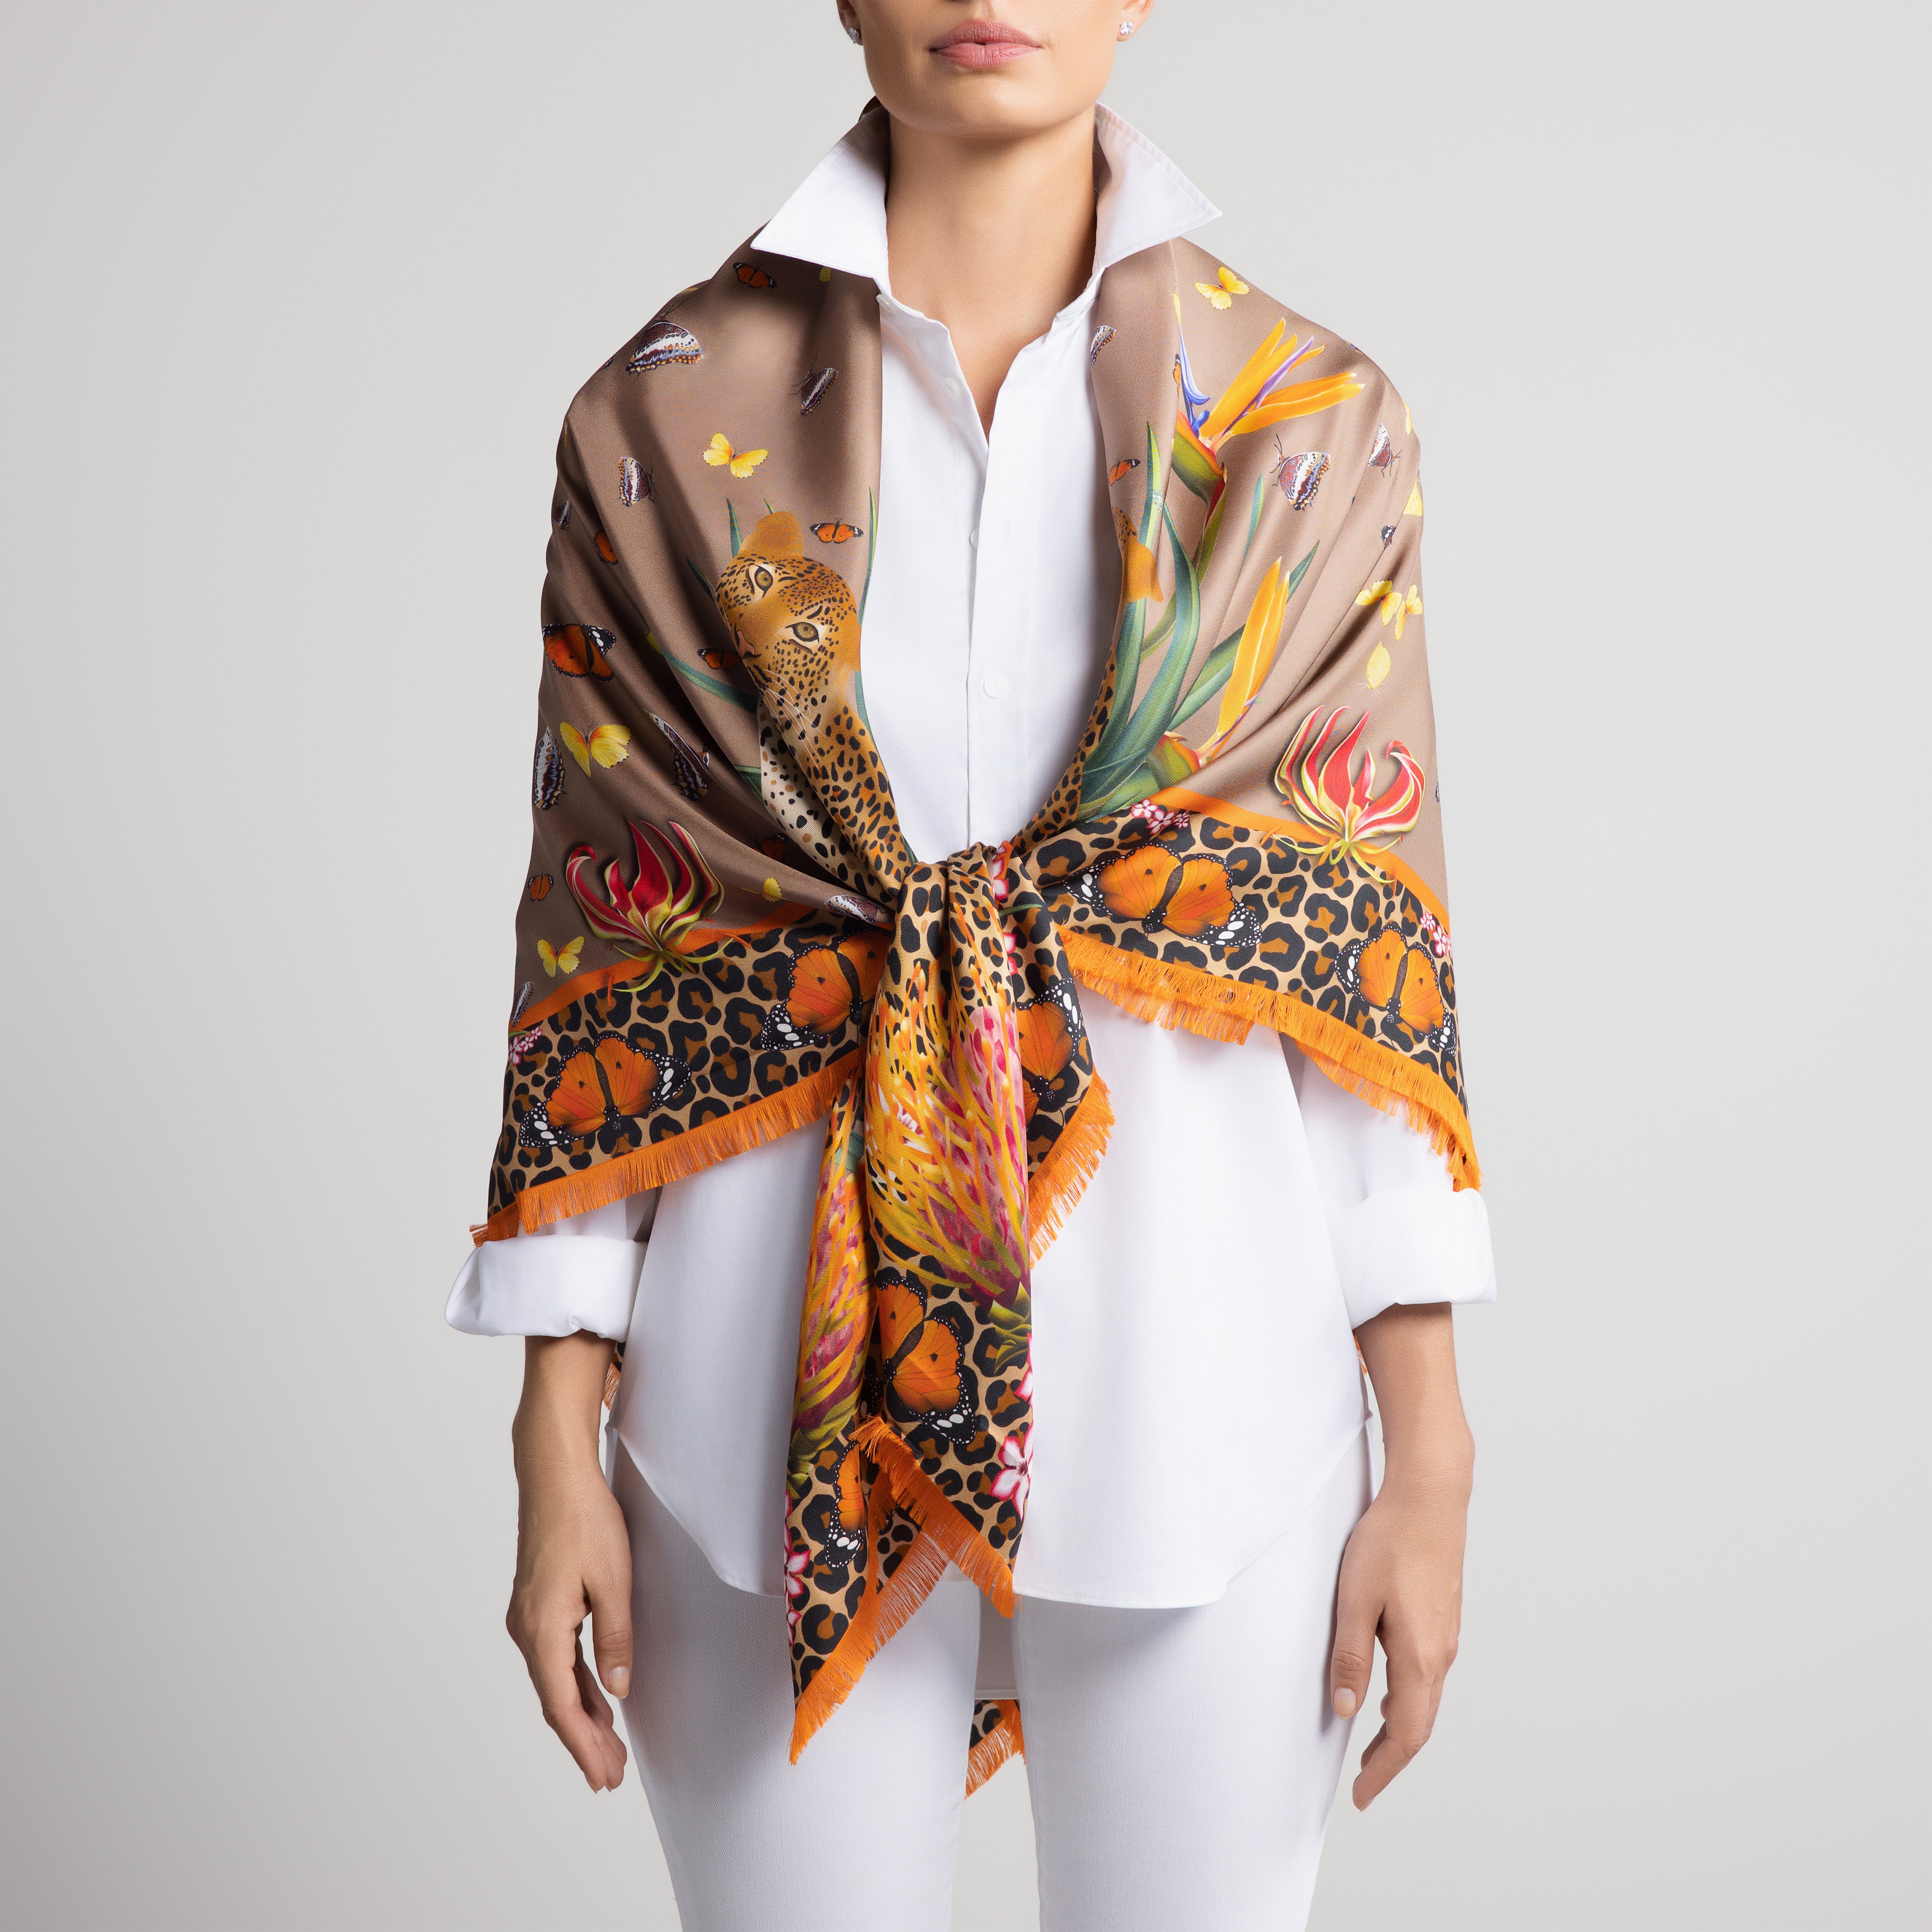 Leopard & Butterfly Grande Silk Scarf in Tan with Hand-Feathered Edges